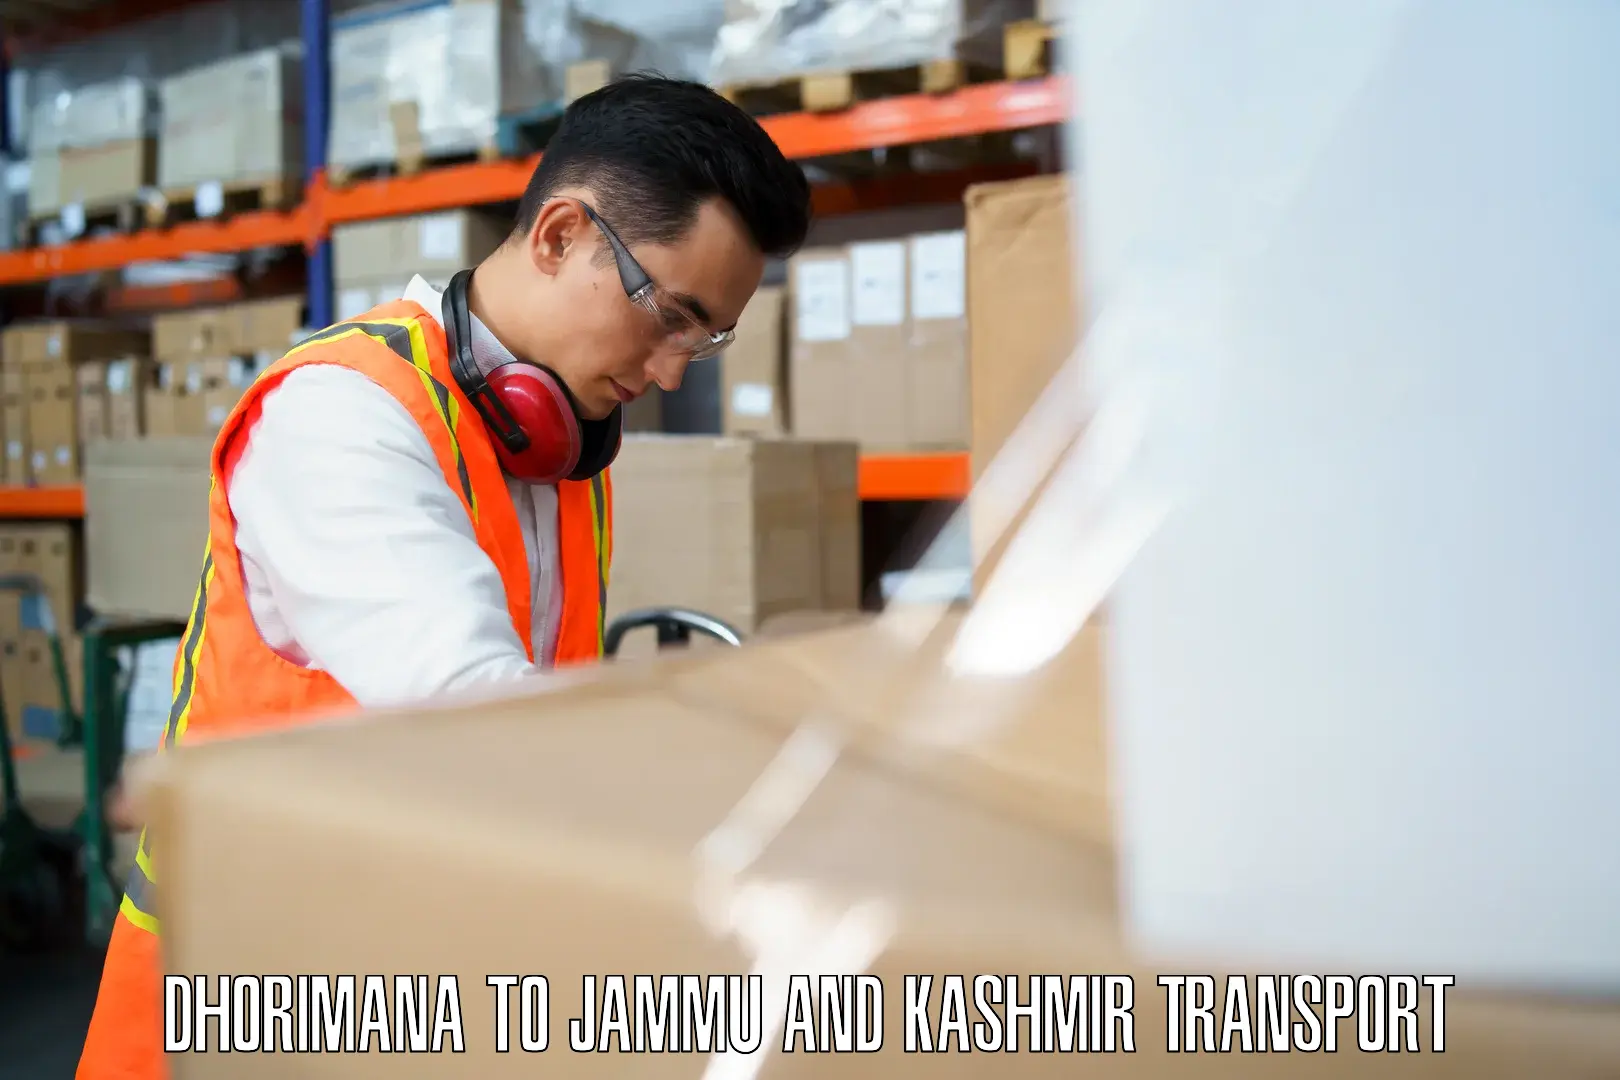 Goods delivery service Dhorimana to Bhaderwah